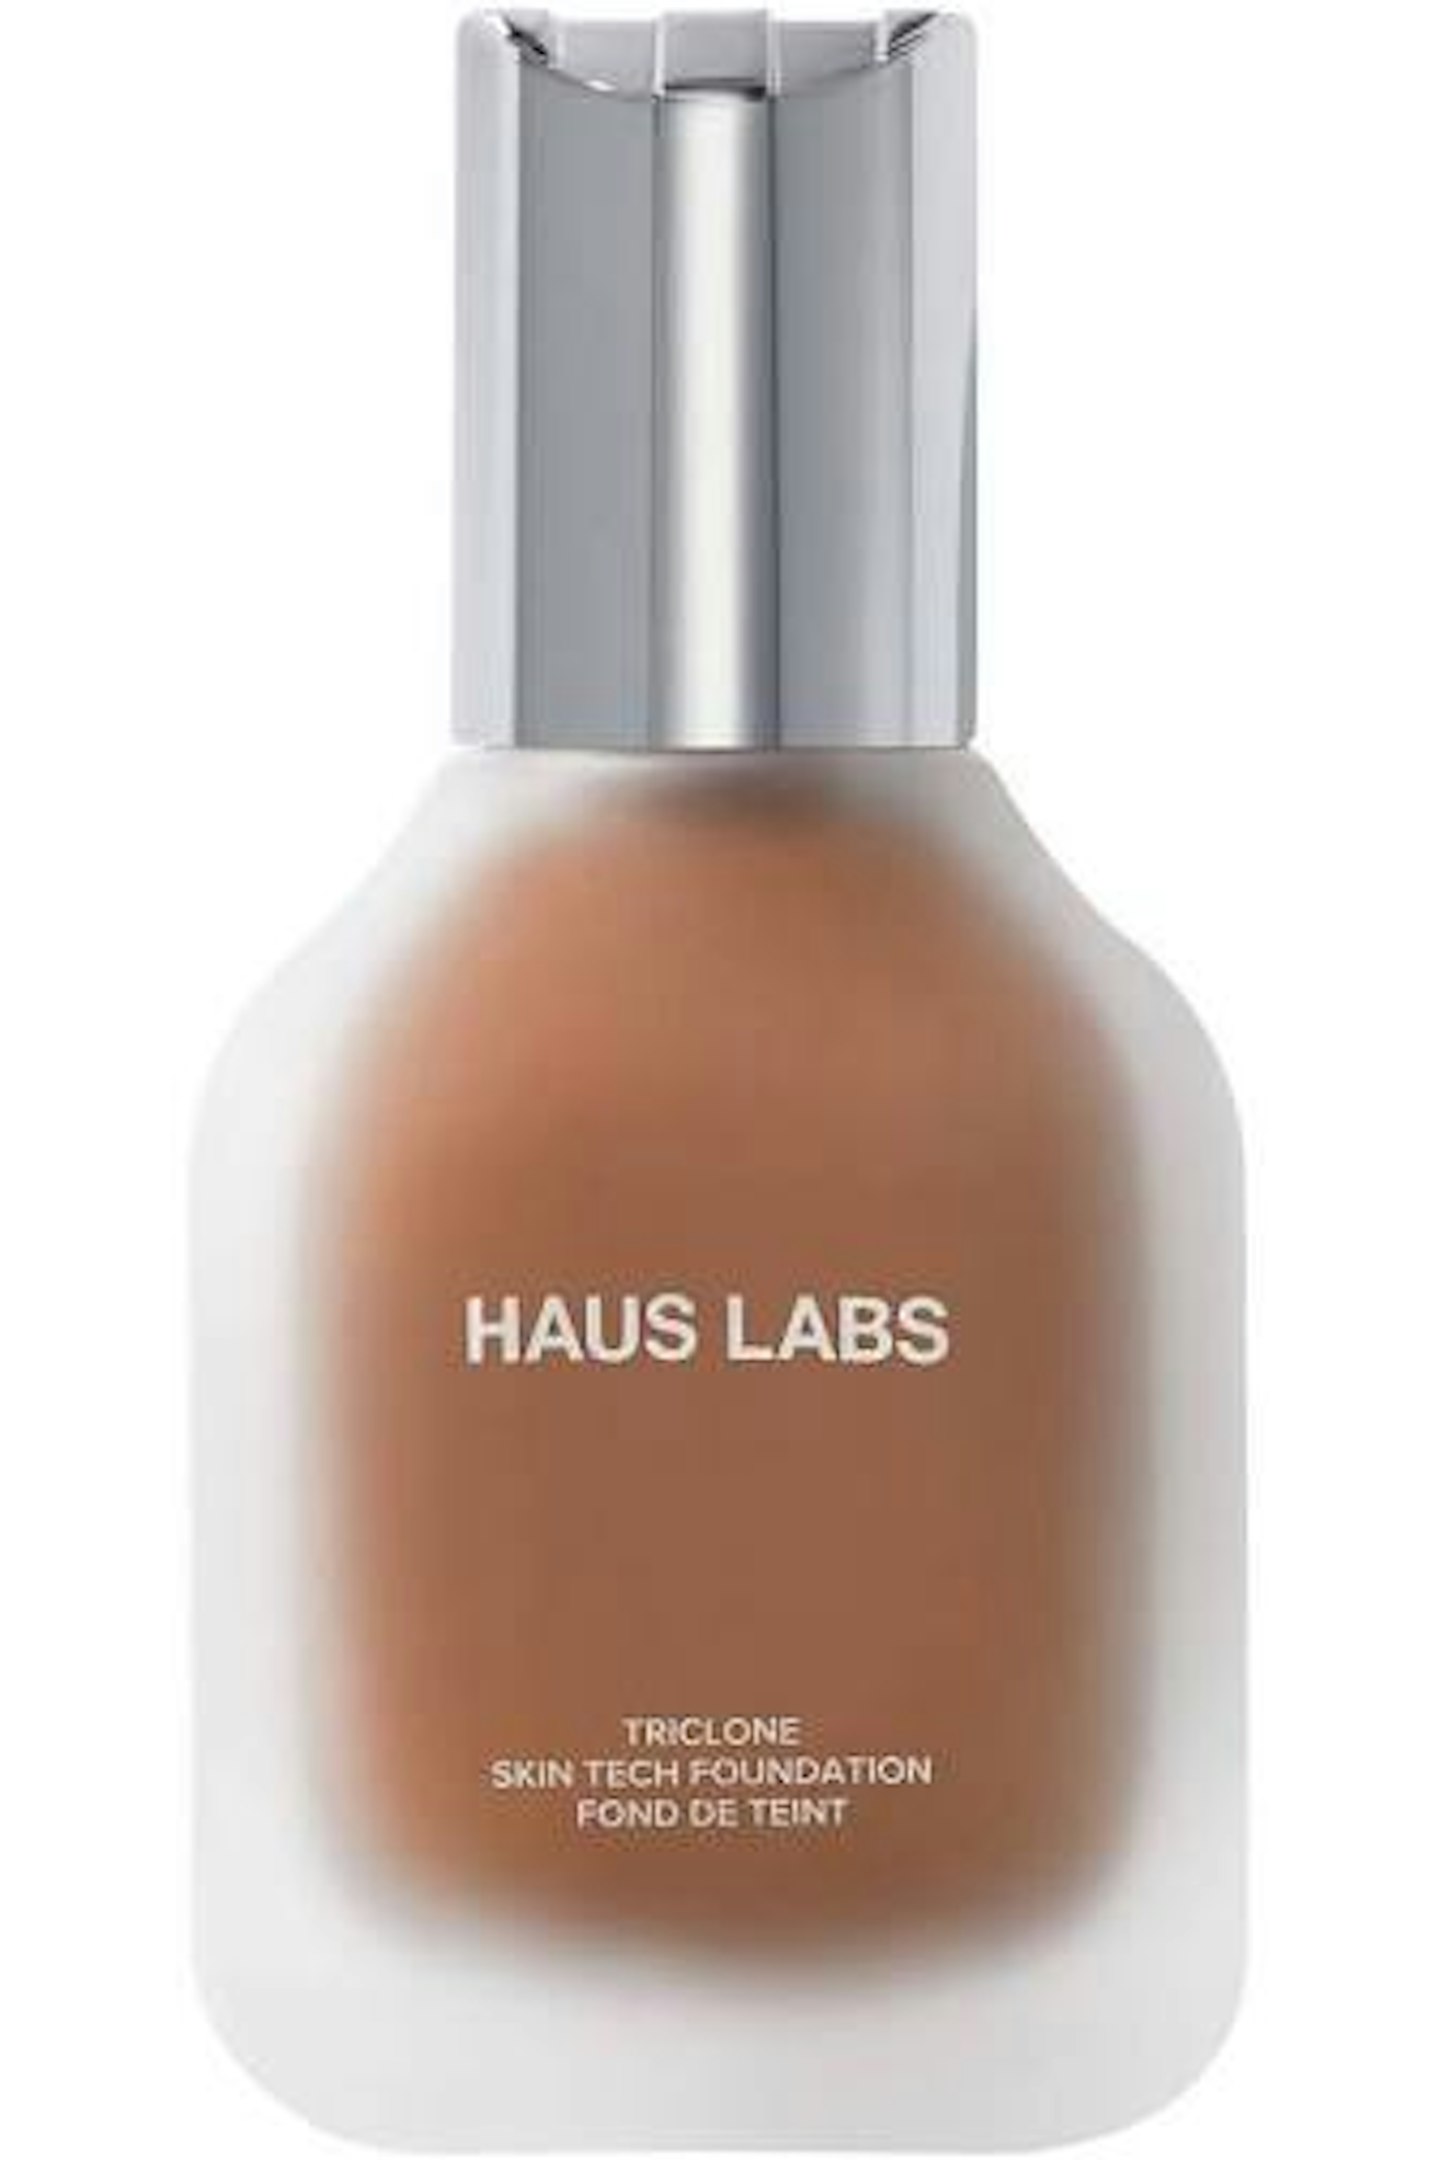 HAUS LABS Triclone Skin Tech Medium Coverage Foundation with Fermented Arnica